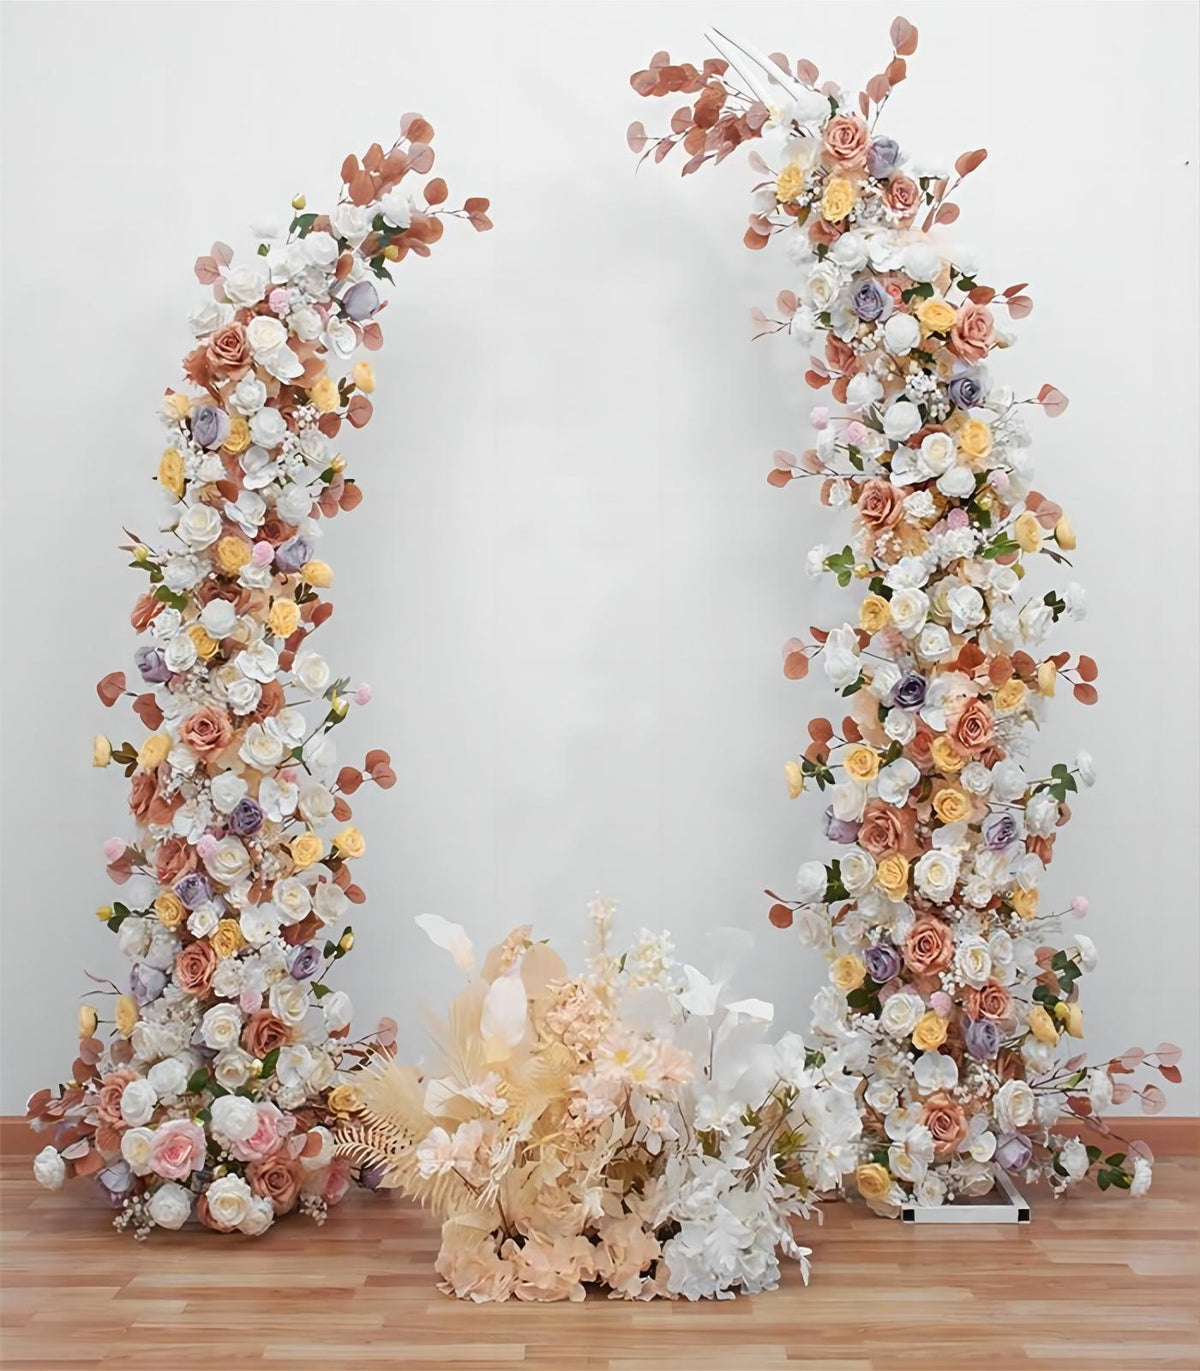 Horn Arch Brown Rose Phalaenopsis Artificial Flower Rose Peony Wedding Party Birthday Backdrop Decor CH9131-2